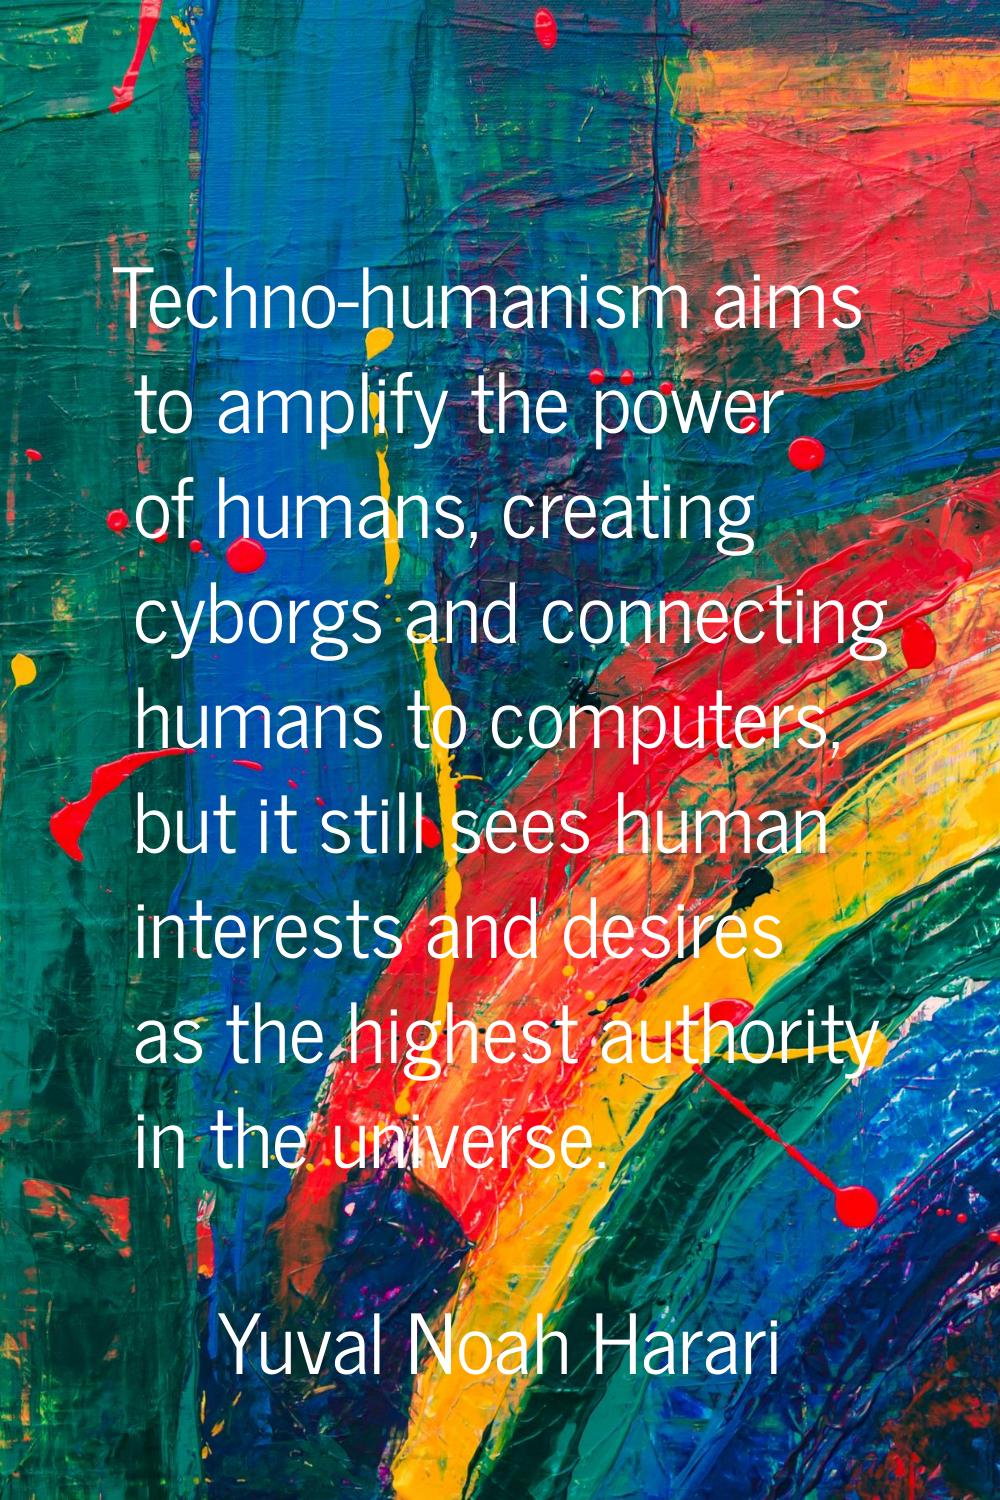 Techno-humanism aims to amplify the power of humans, creating cyborgs and connecting humans to comp